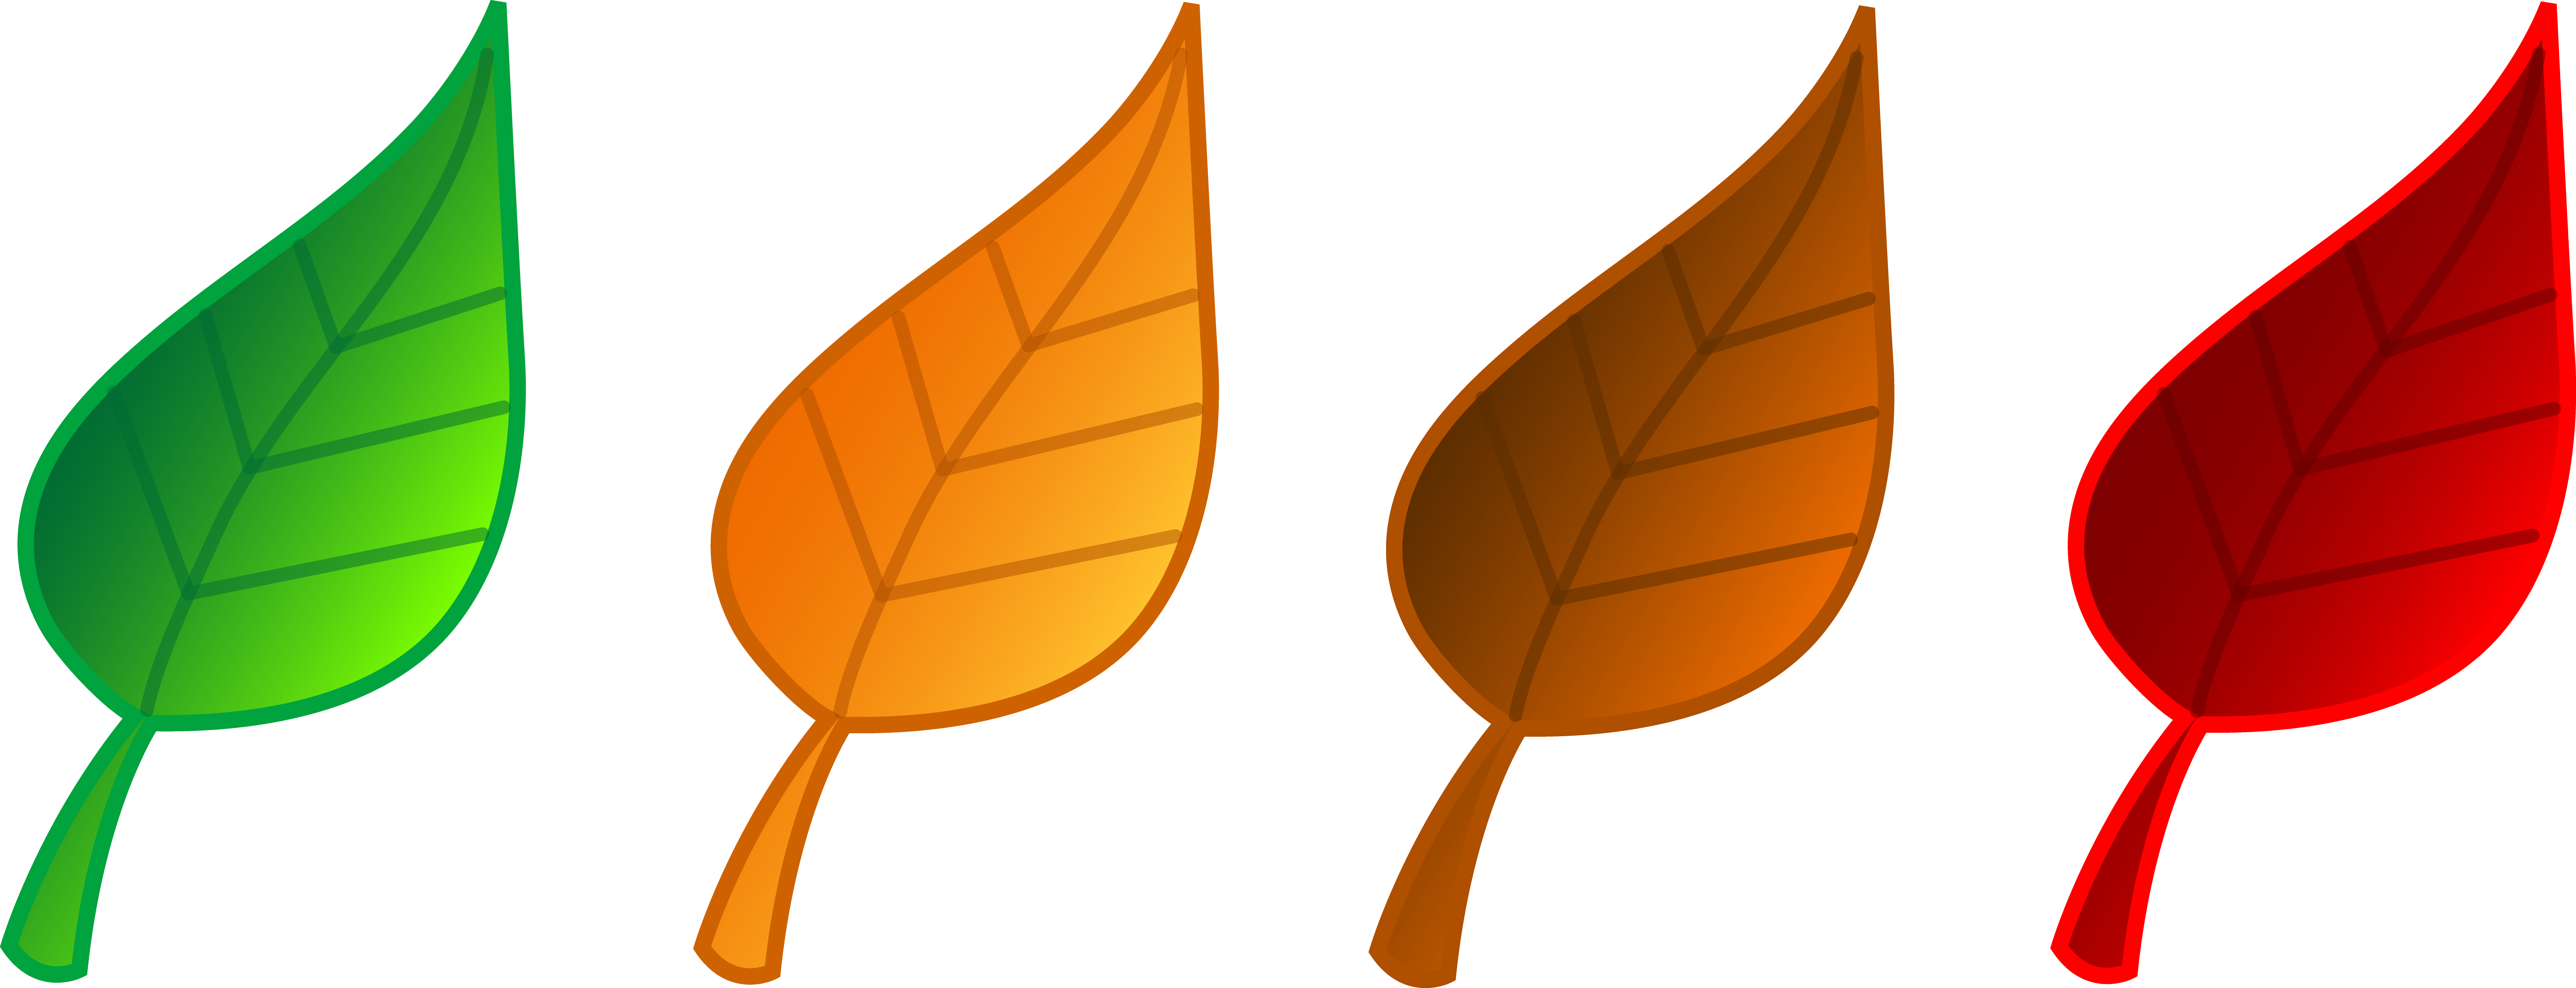 Yellow leaf clipart free clipart images